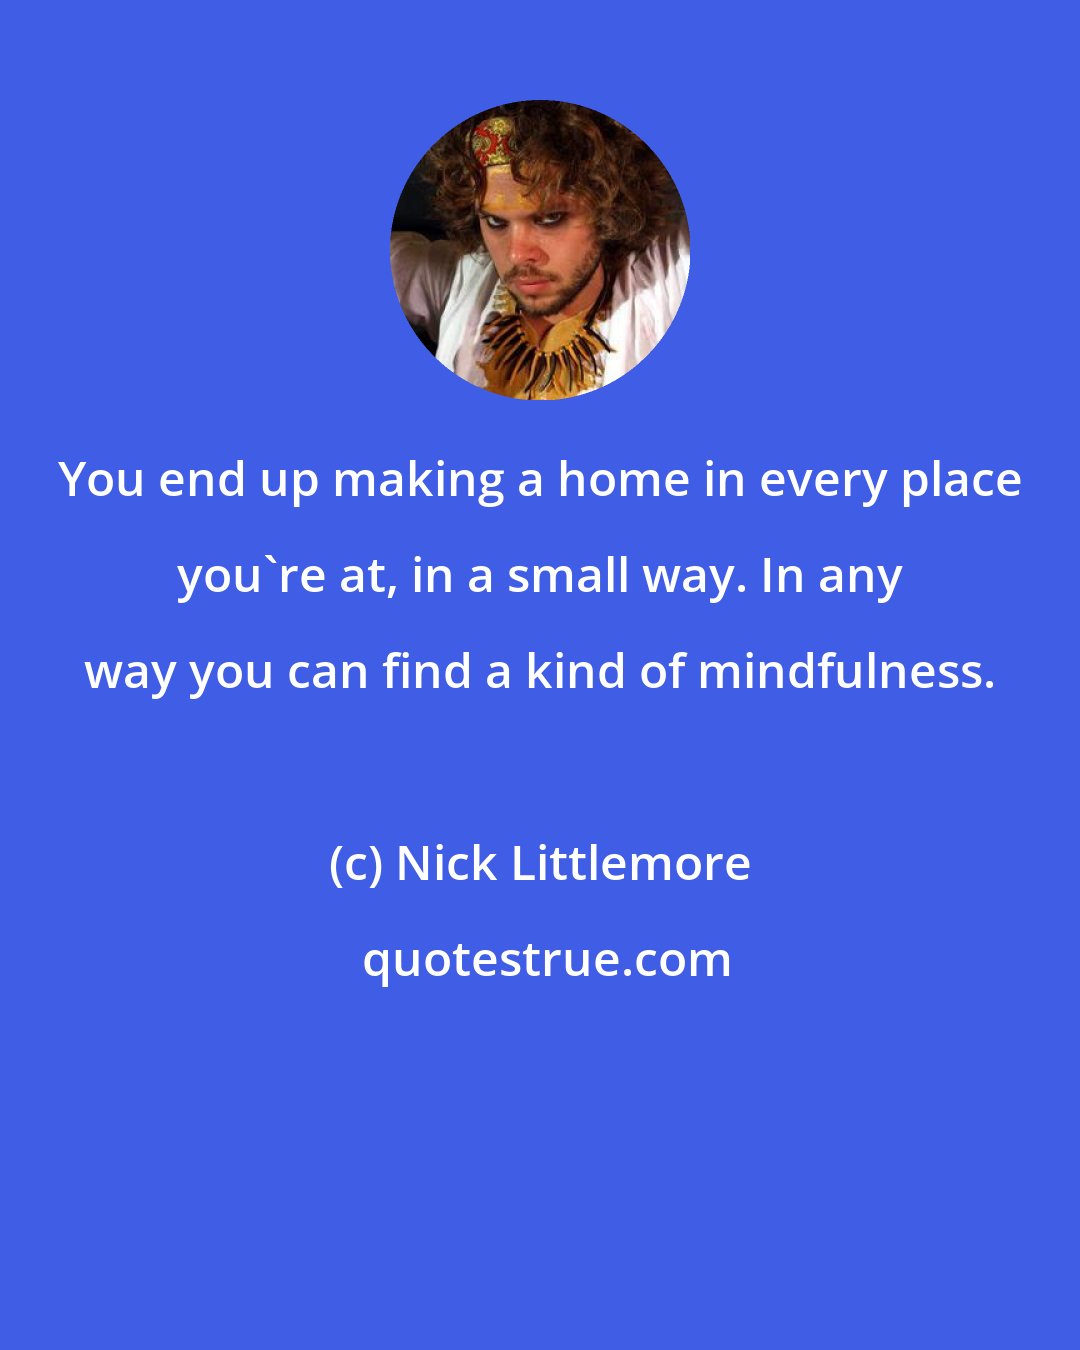 Nick Littlemore: You end up making a home in every place you're at, in a small way. In any way you can find a kind of mindfulness.